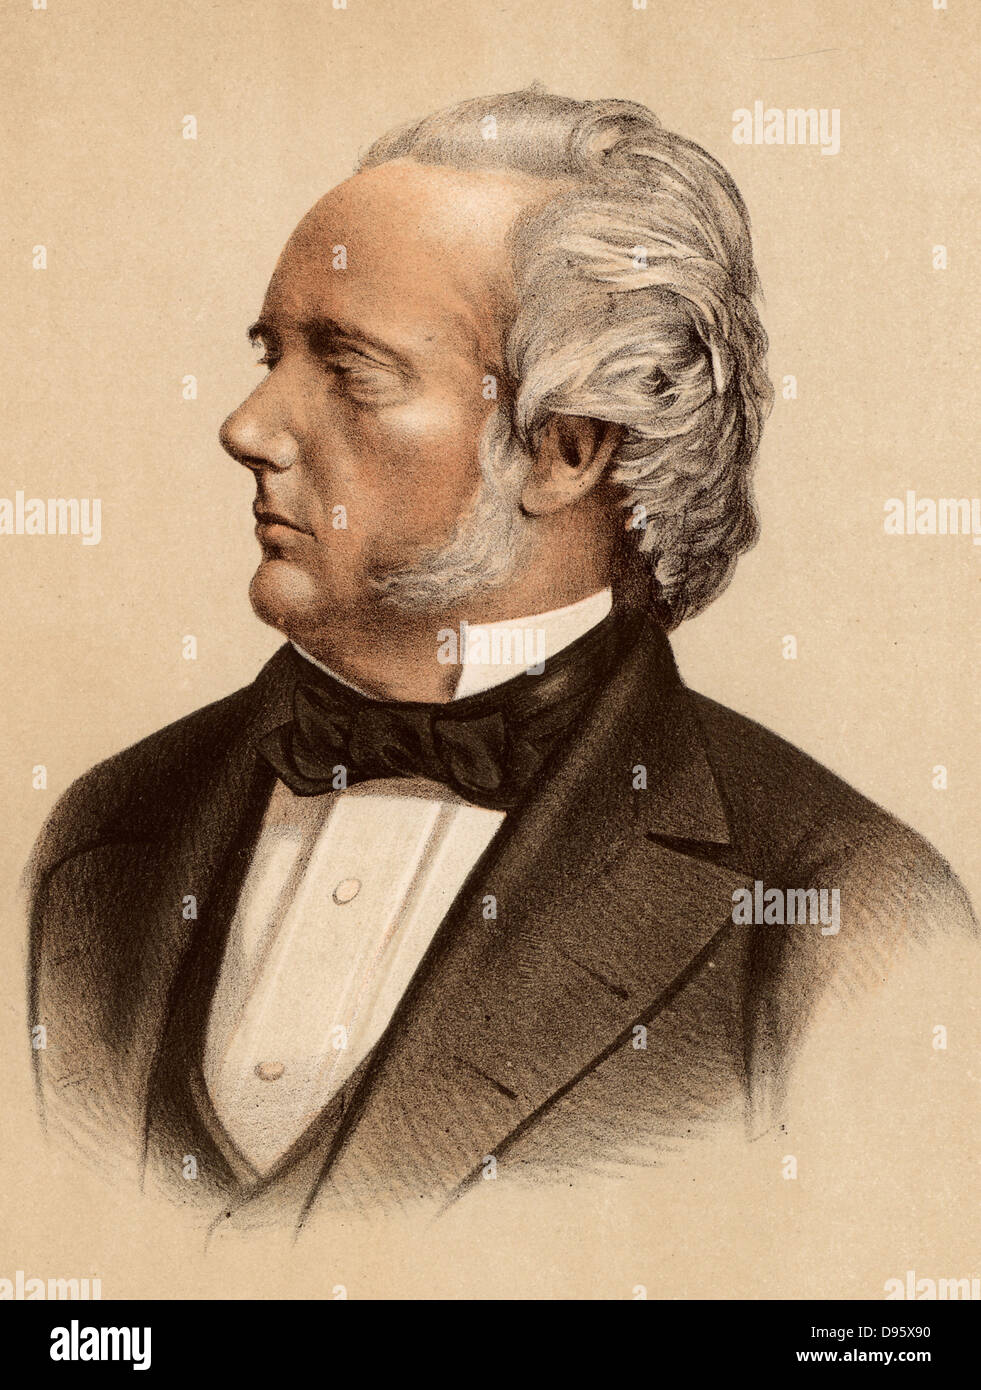 George Douglas Campbell, 8th Duke of Argyll (1823-1900) Marquis of Lorne (1837-1847), succeeded to the Dukedom in 1847. British Whig (Liberal) politician and scientist. Supported cataclysmic school of geology rather than uniformitarianism.  Tinted lithograph. Stock Photo